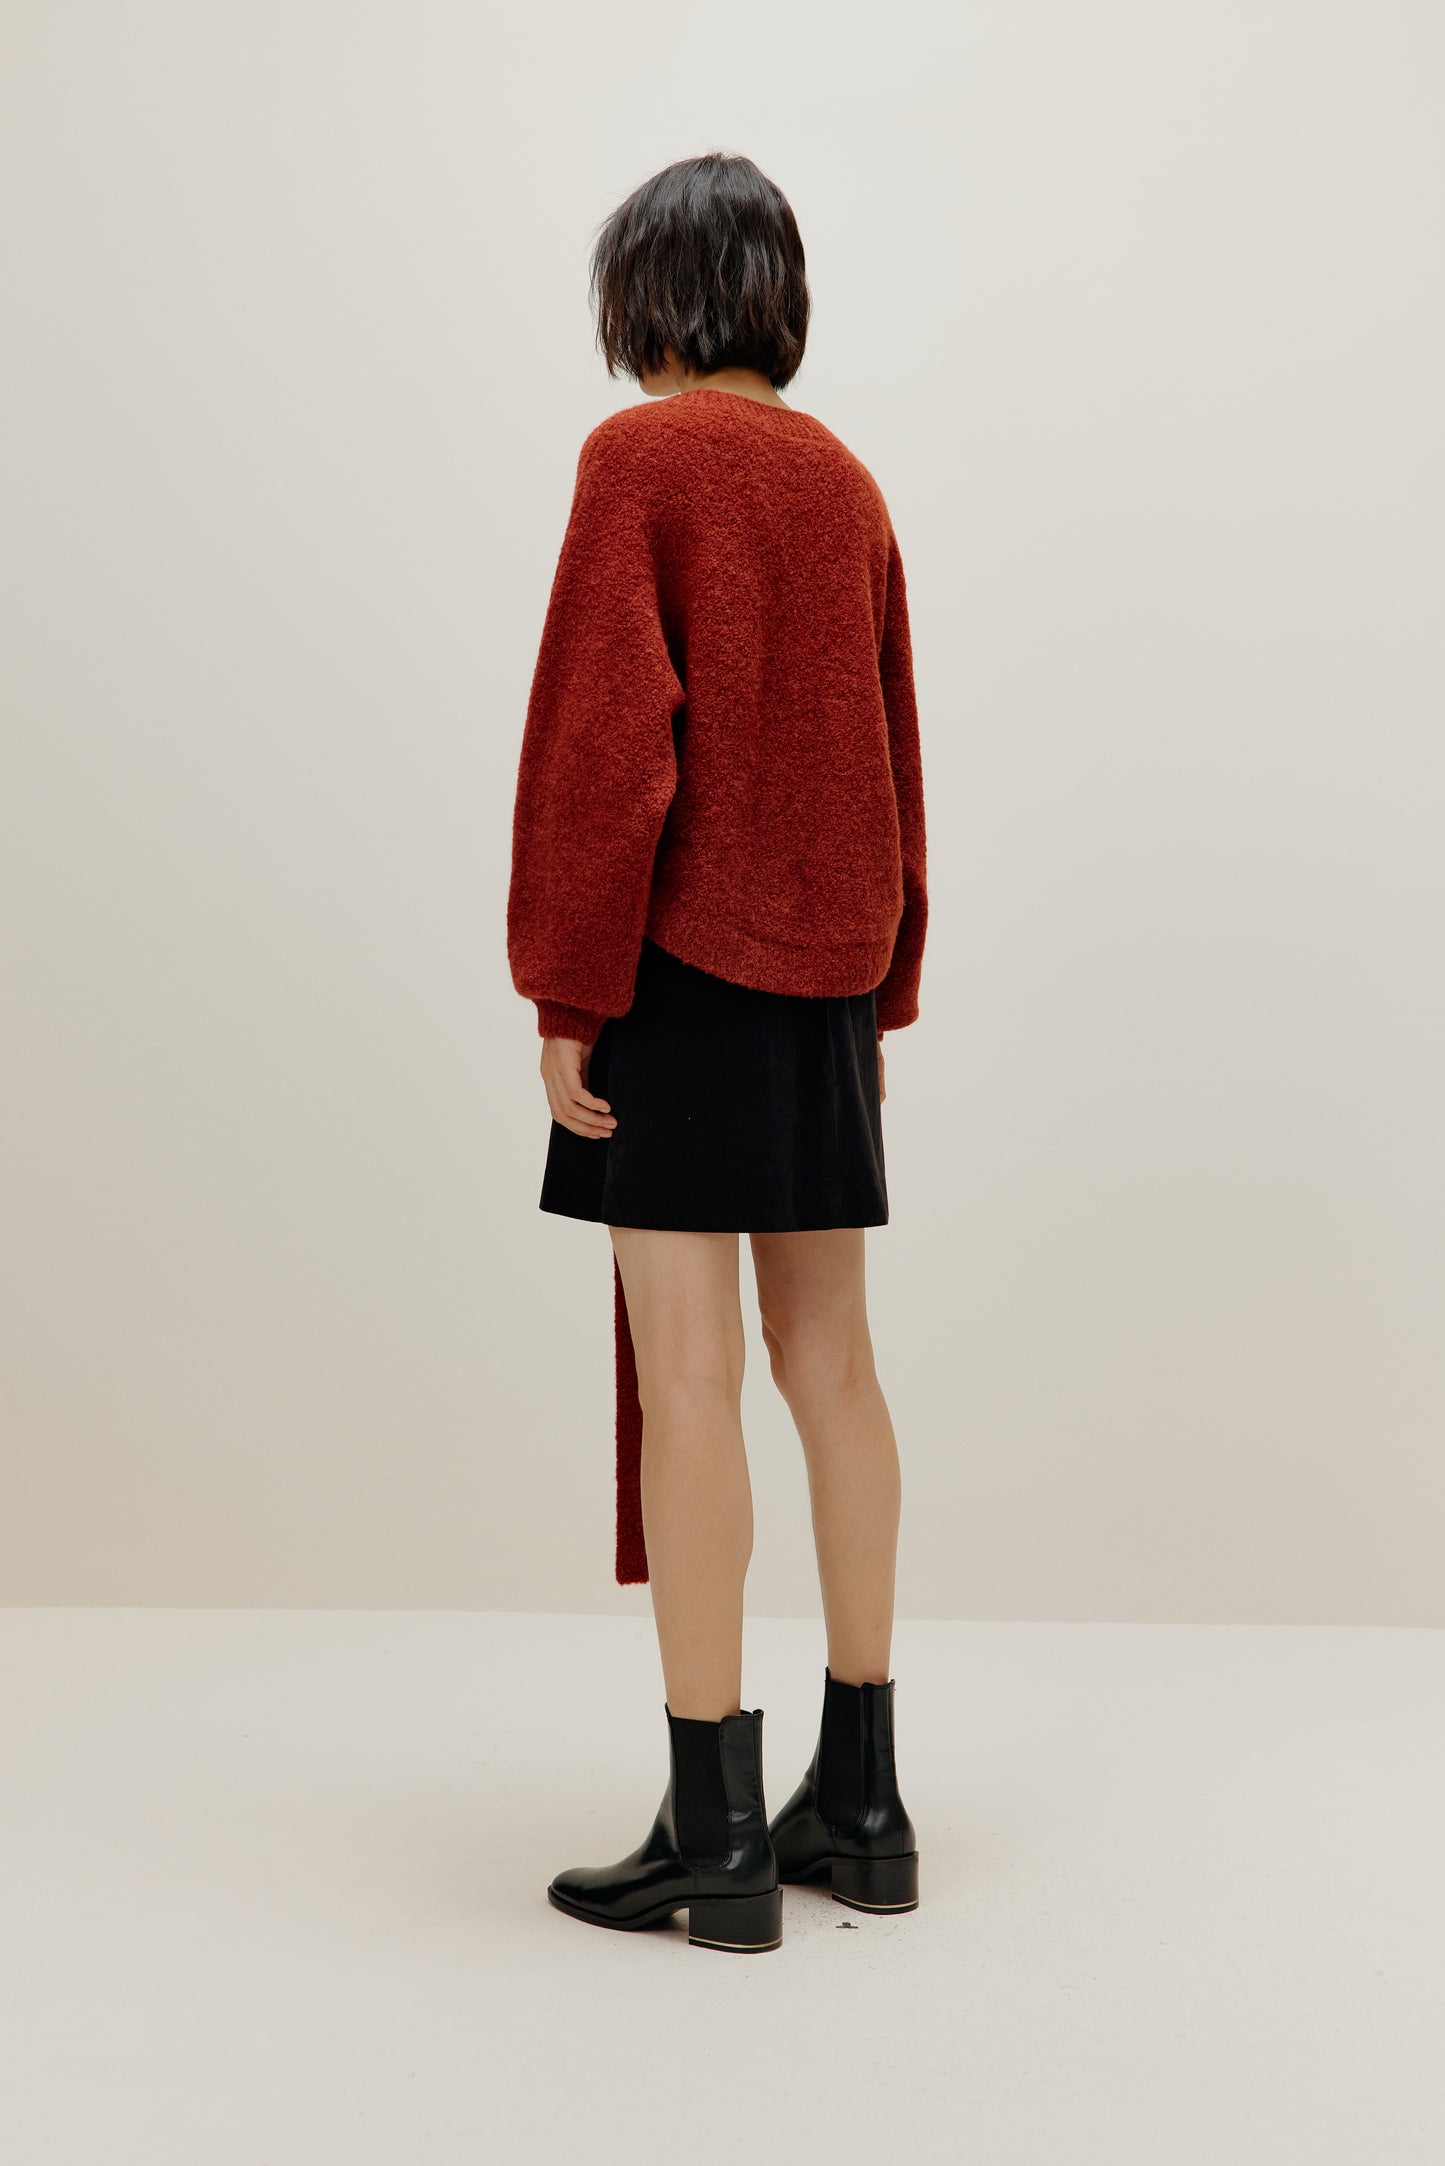 back view of a woman wearing a red wrap cardigan and black skirt